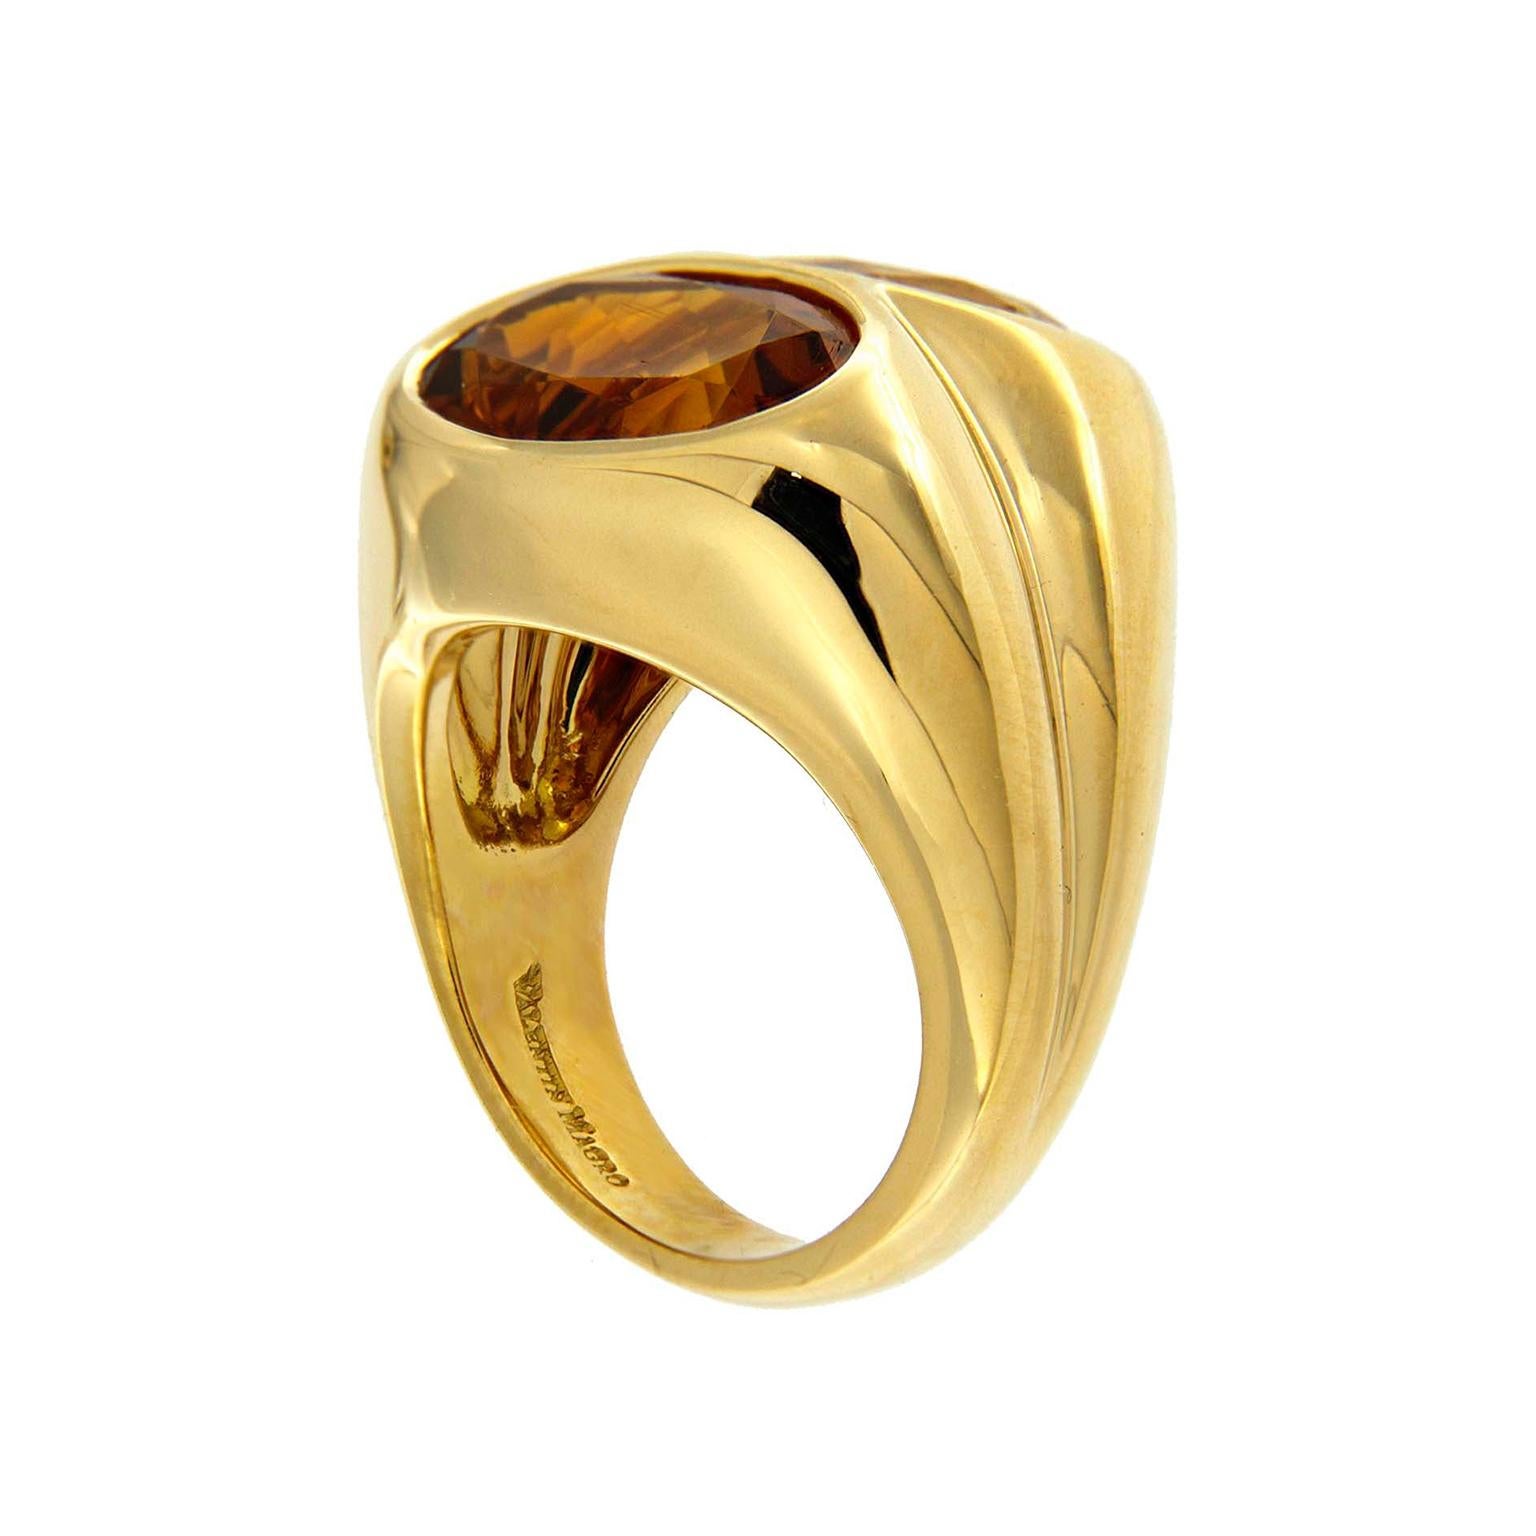 Two bands merge into a single ring. The 18k yellow gold body features a broad shank with a groove along its center, resembling two pieces merging. On top are faceted bezel set jewels close enough to touch. One is a saturated Madeira citrine, and the